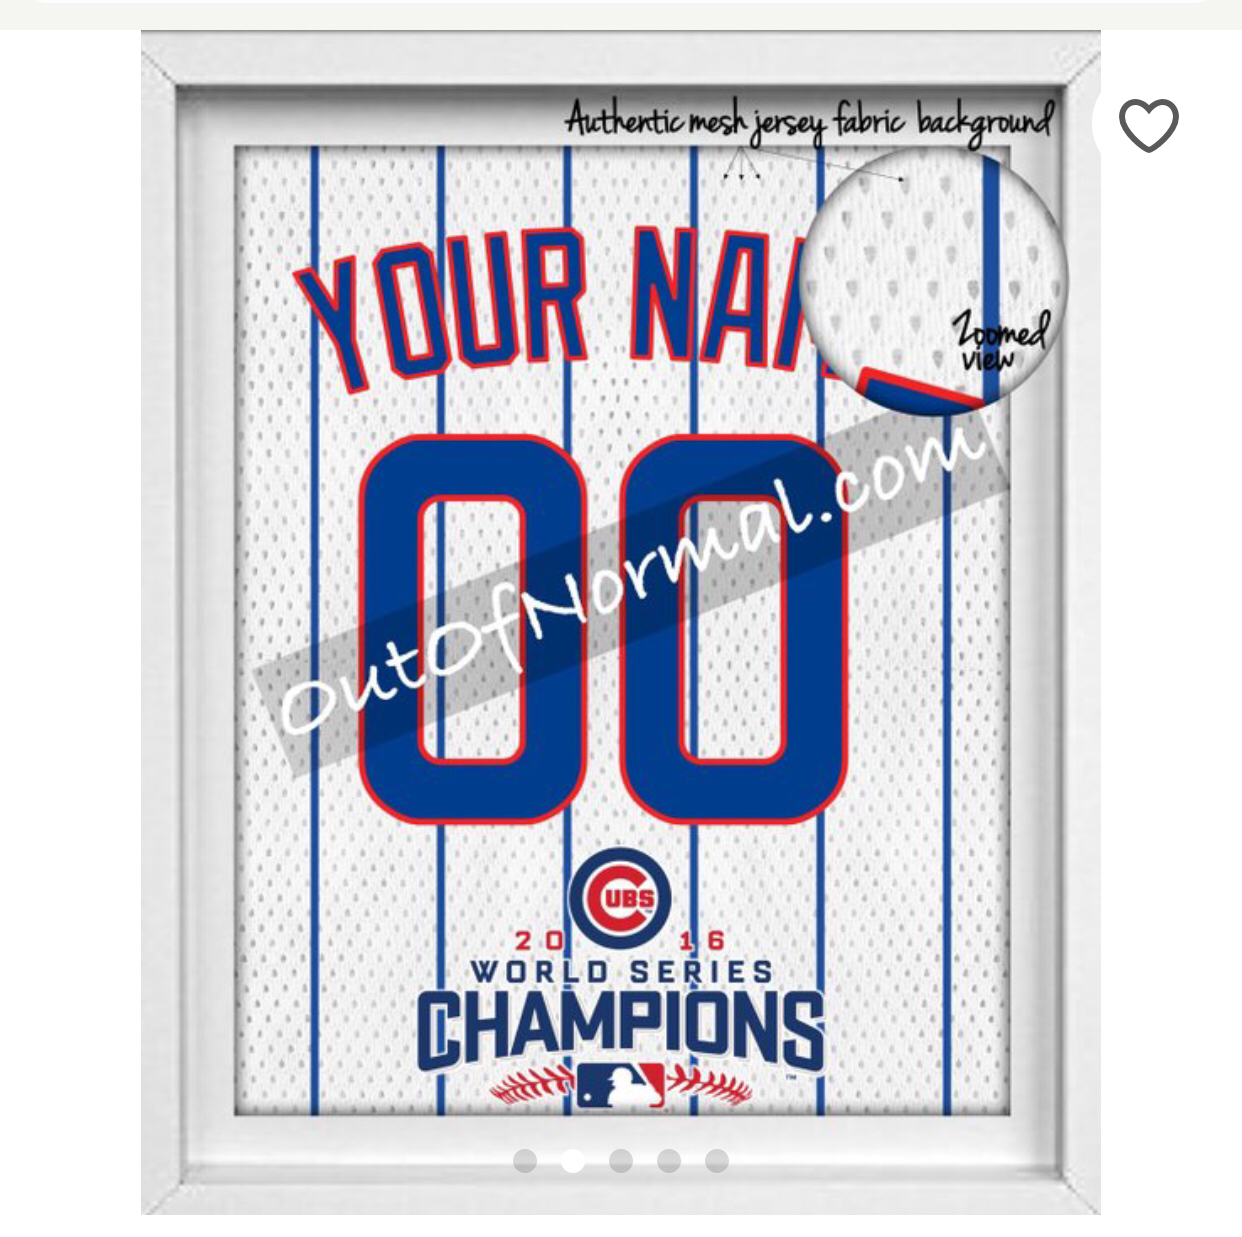 cubs jersey your name